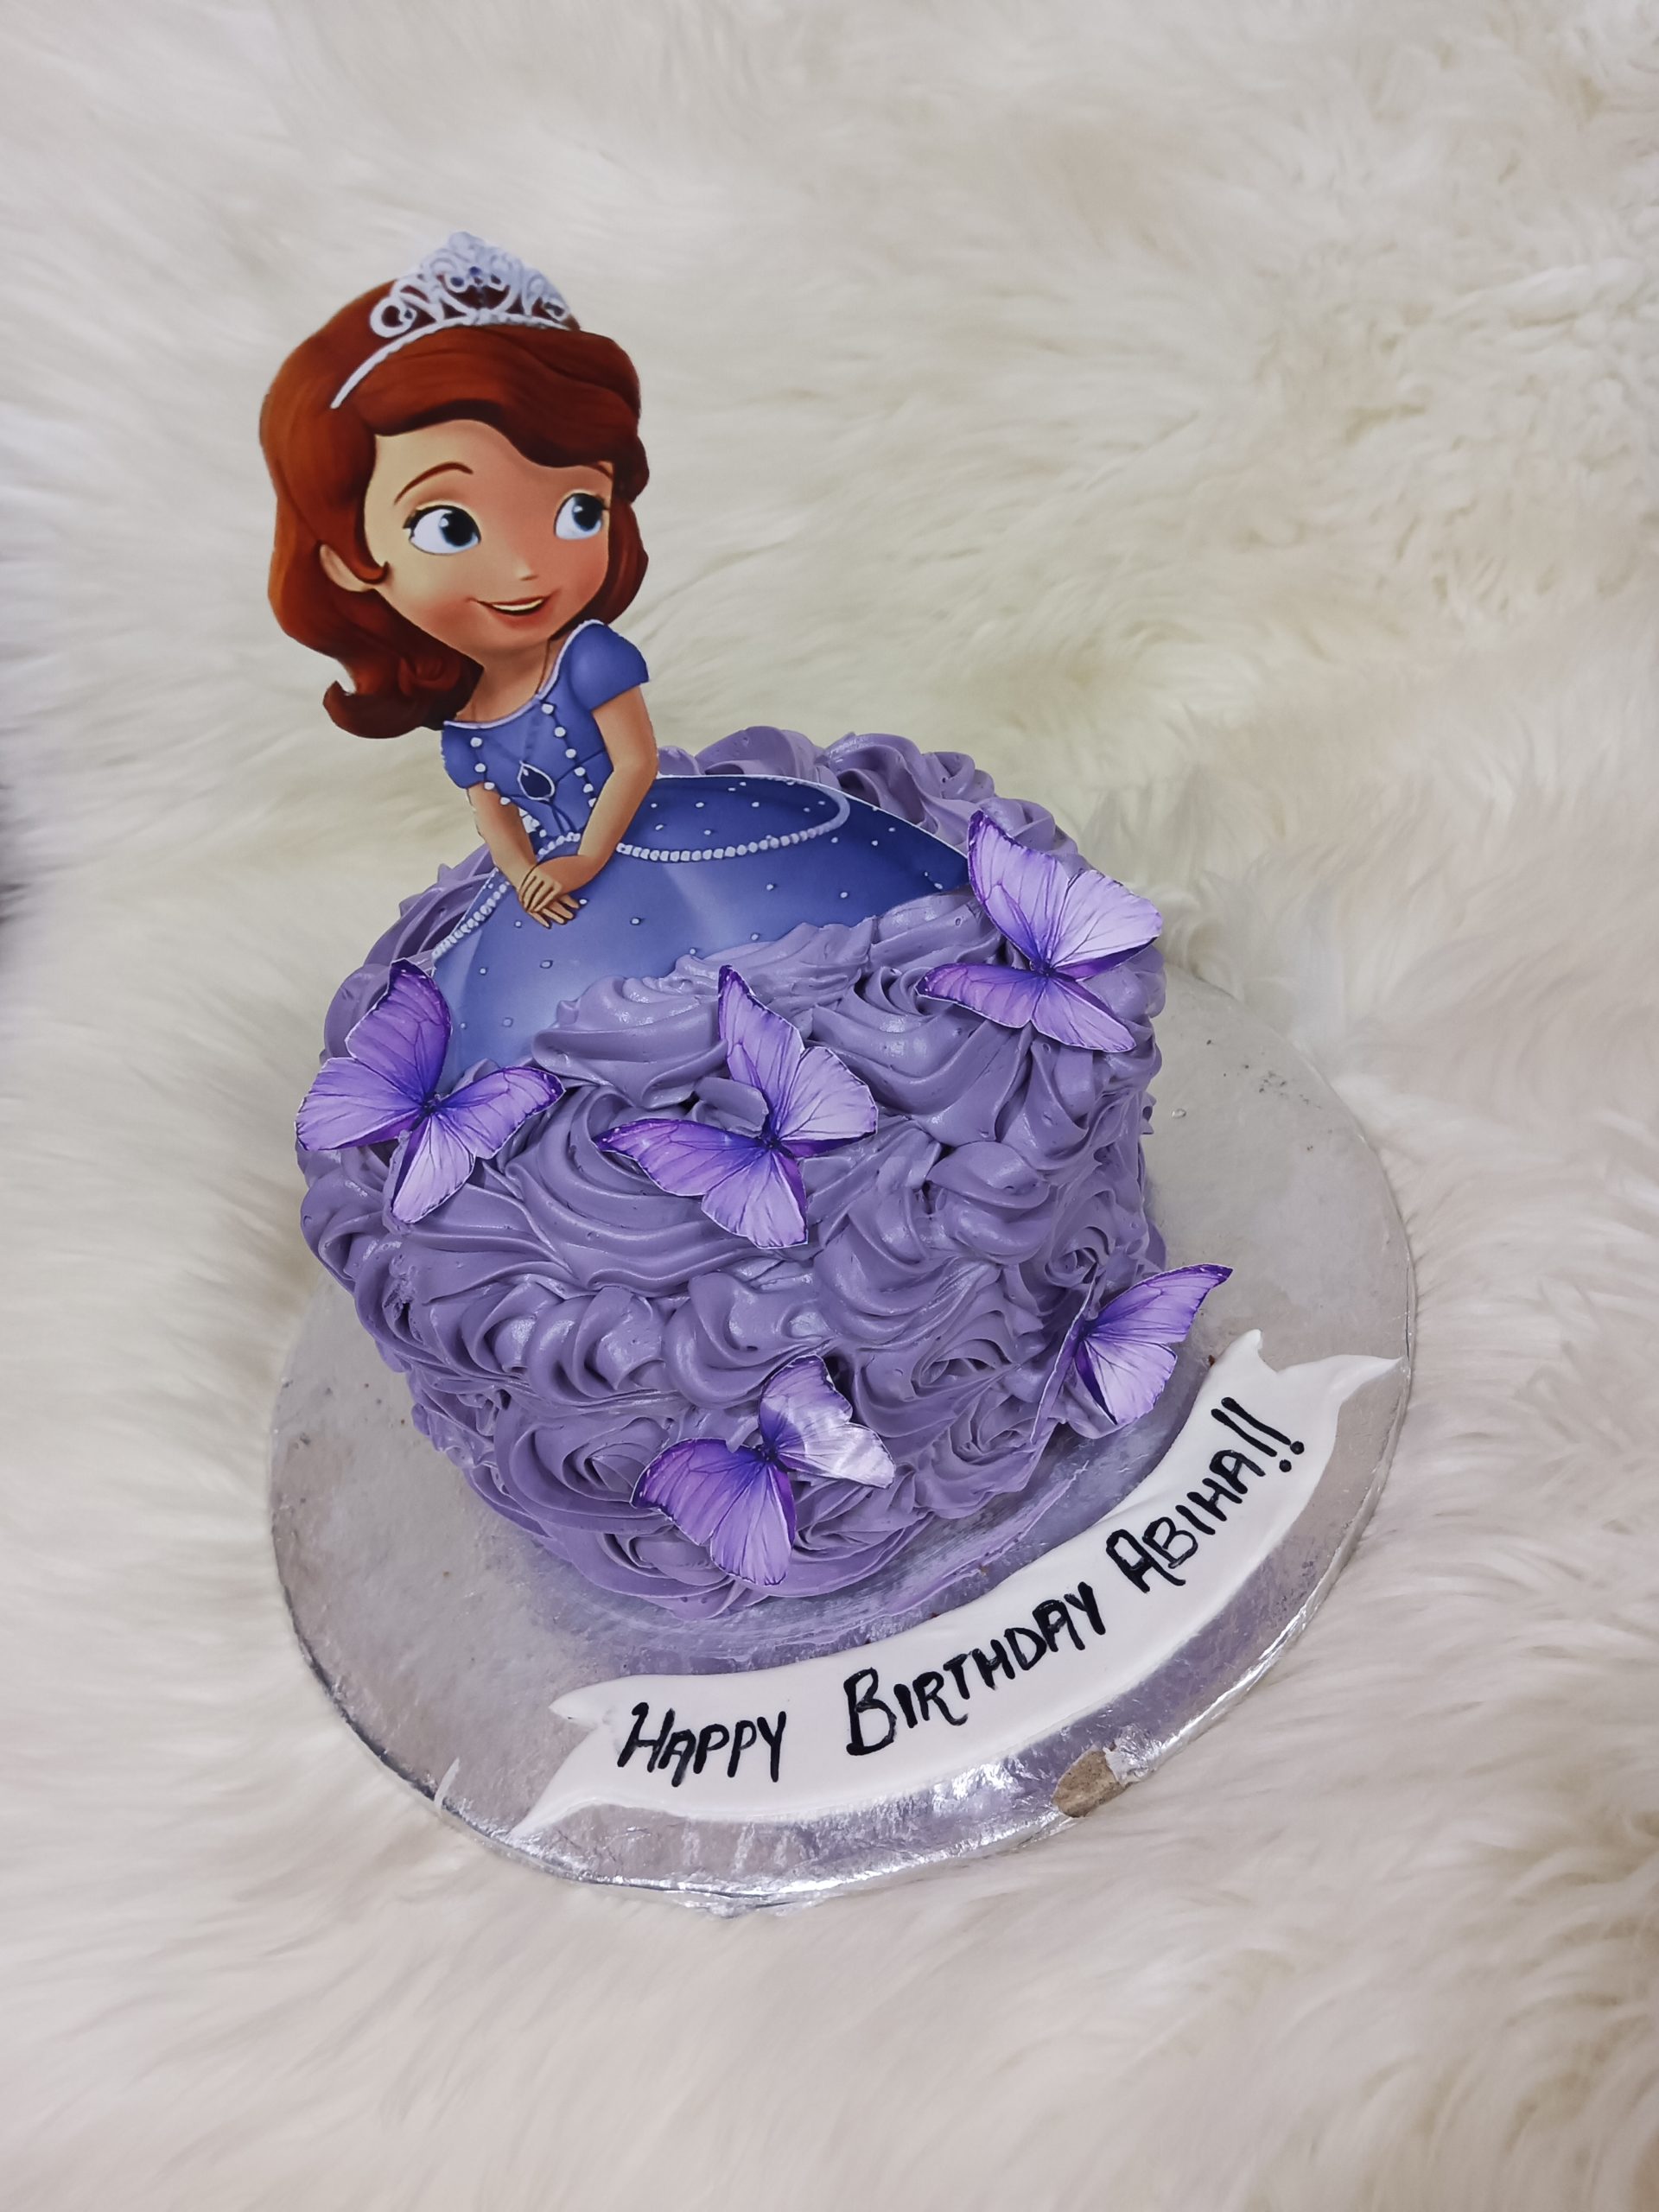 Princess Sofia cake with topper | Charly's Bakery | Flickr